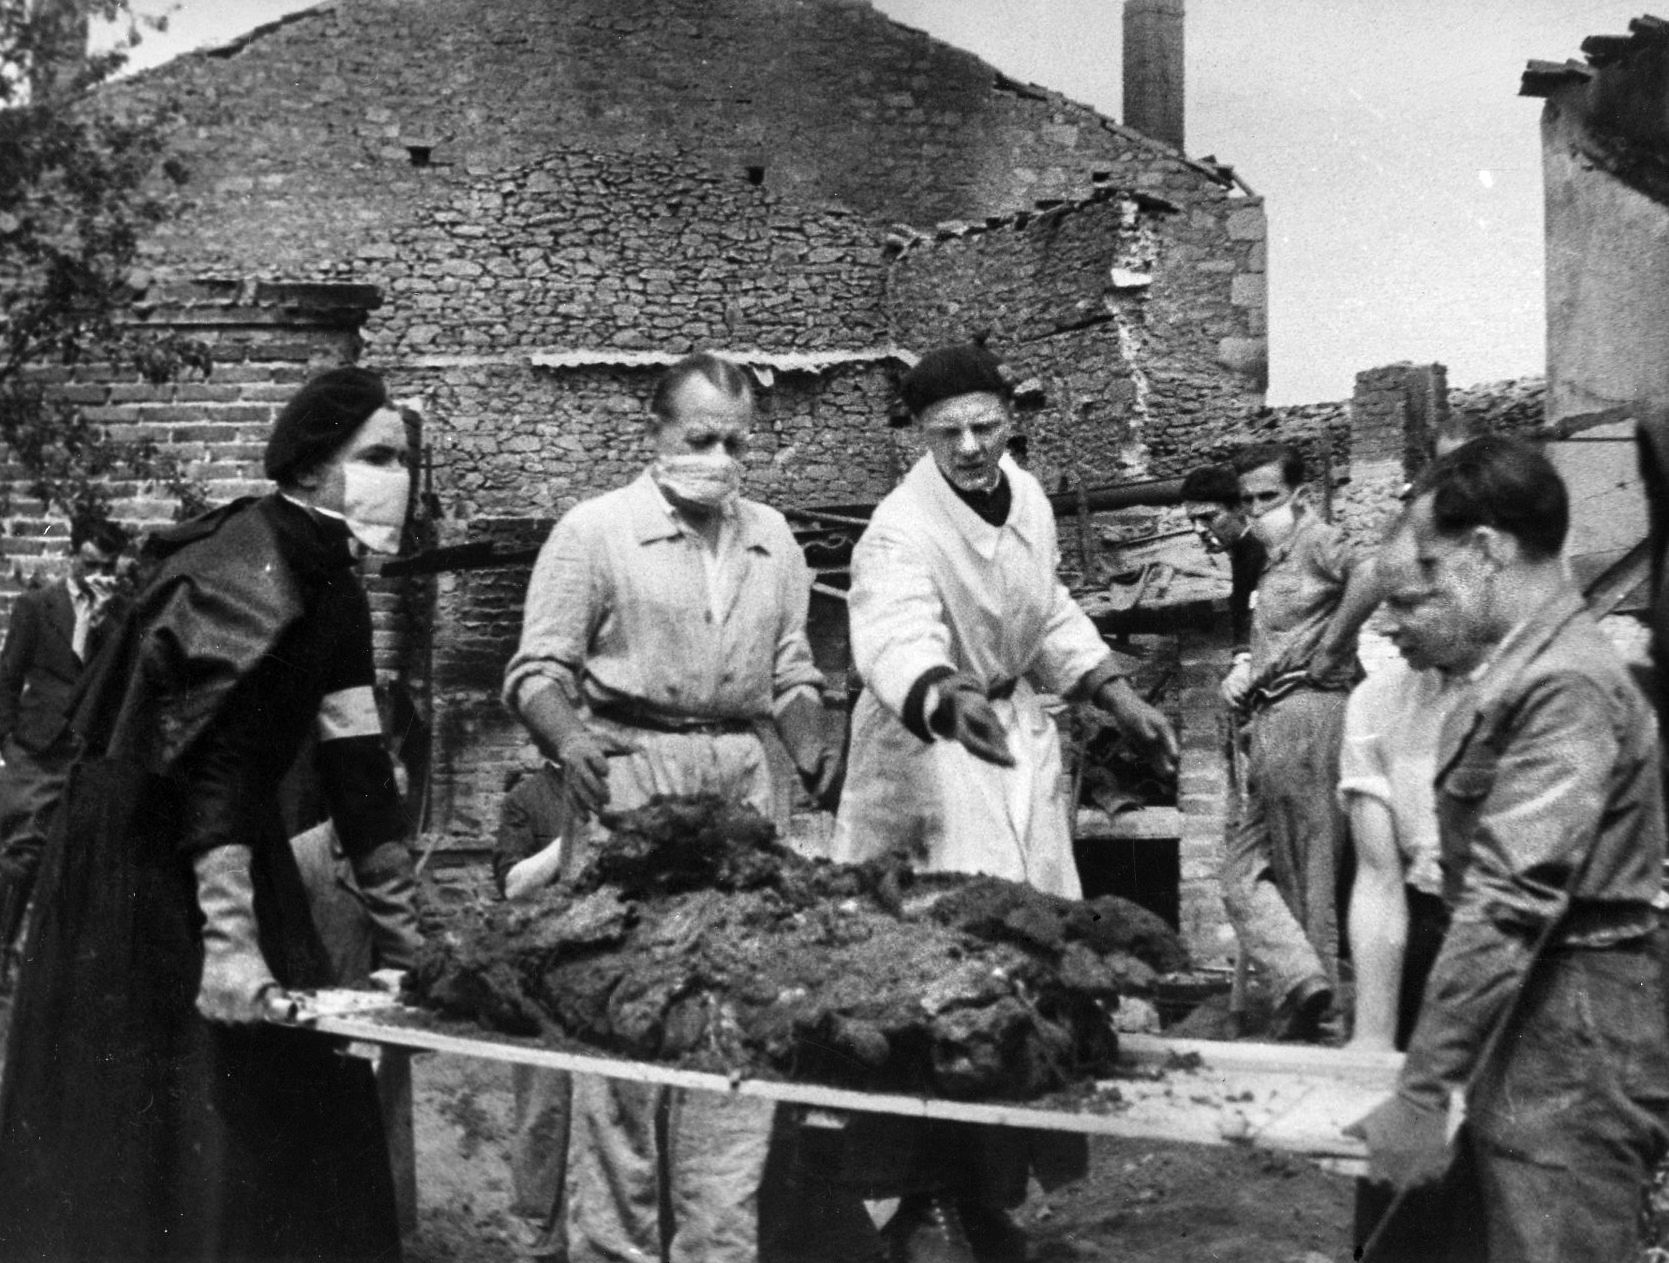 Aid workers, investigators and local villagers arrived on the scene as soon as the Germans left. They found two mass graves, a poor attempt to conceal the evidence, and were faced with the task of exhuming the charred remains, identifying them and giving 642 men, women and children, of whom only 52 could be identified, a decent burial. 